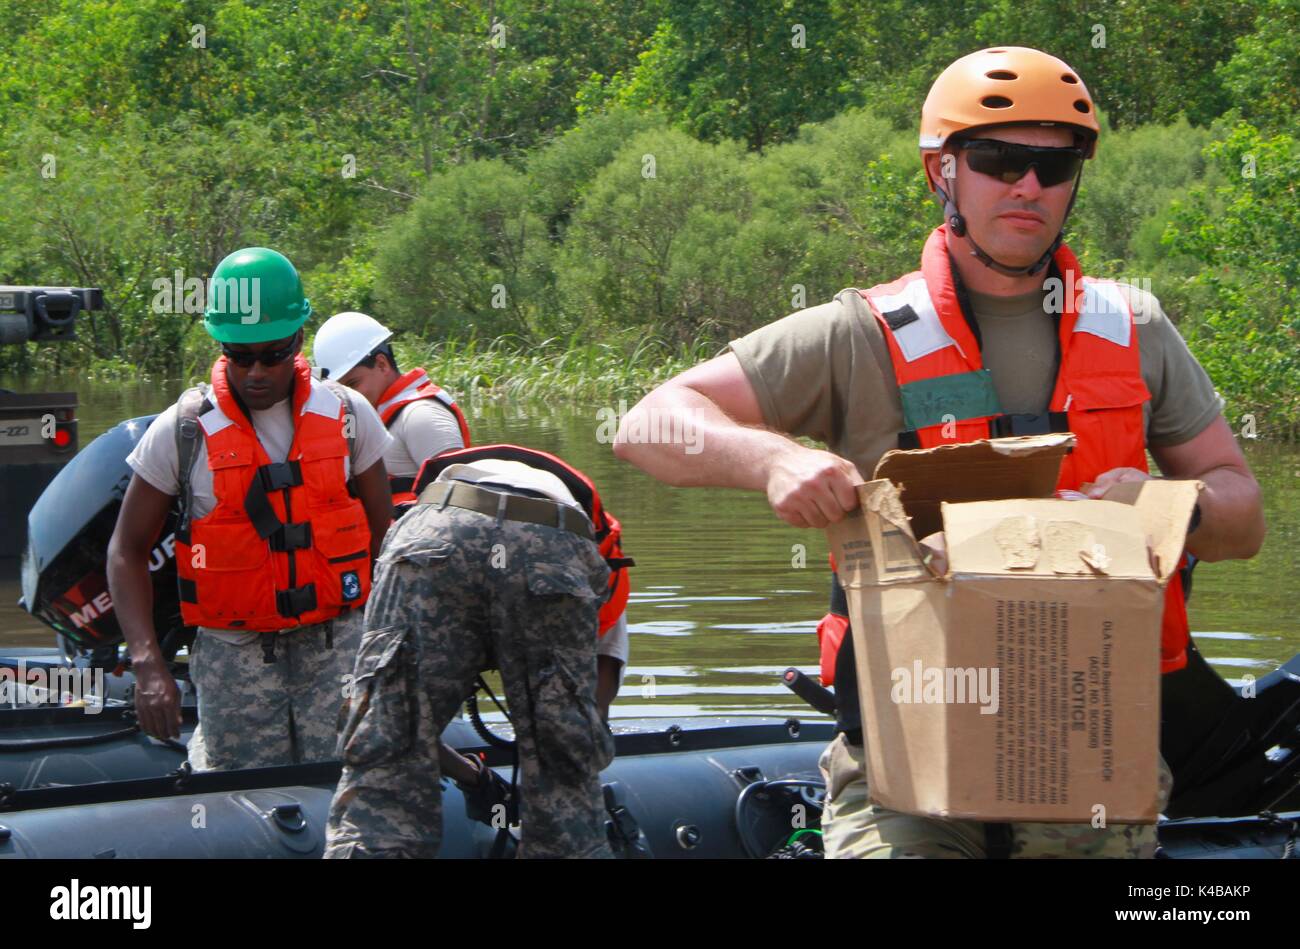 U.S Army 1st Lt. Joshua Wiegand off-loads a box of Meals, Ready-to-Eat for delivery to residents in the aftermath of Hurricane Harvey September 3, 2017 in Beaumont, Texas. Stock Photo